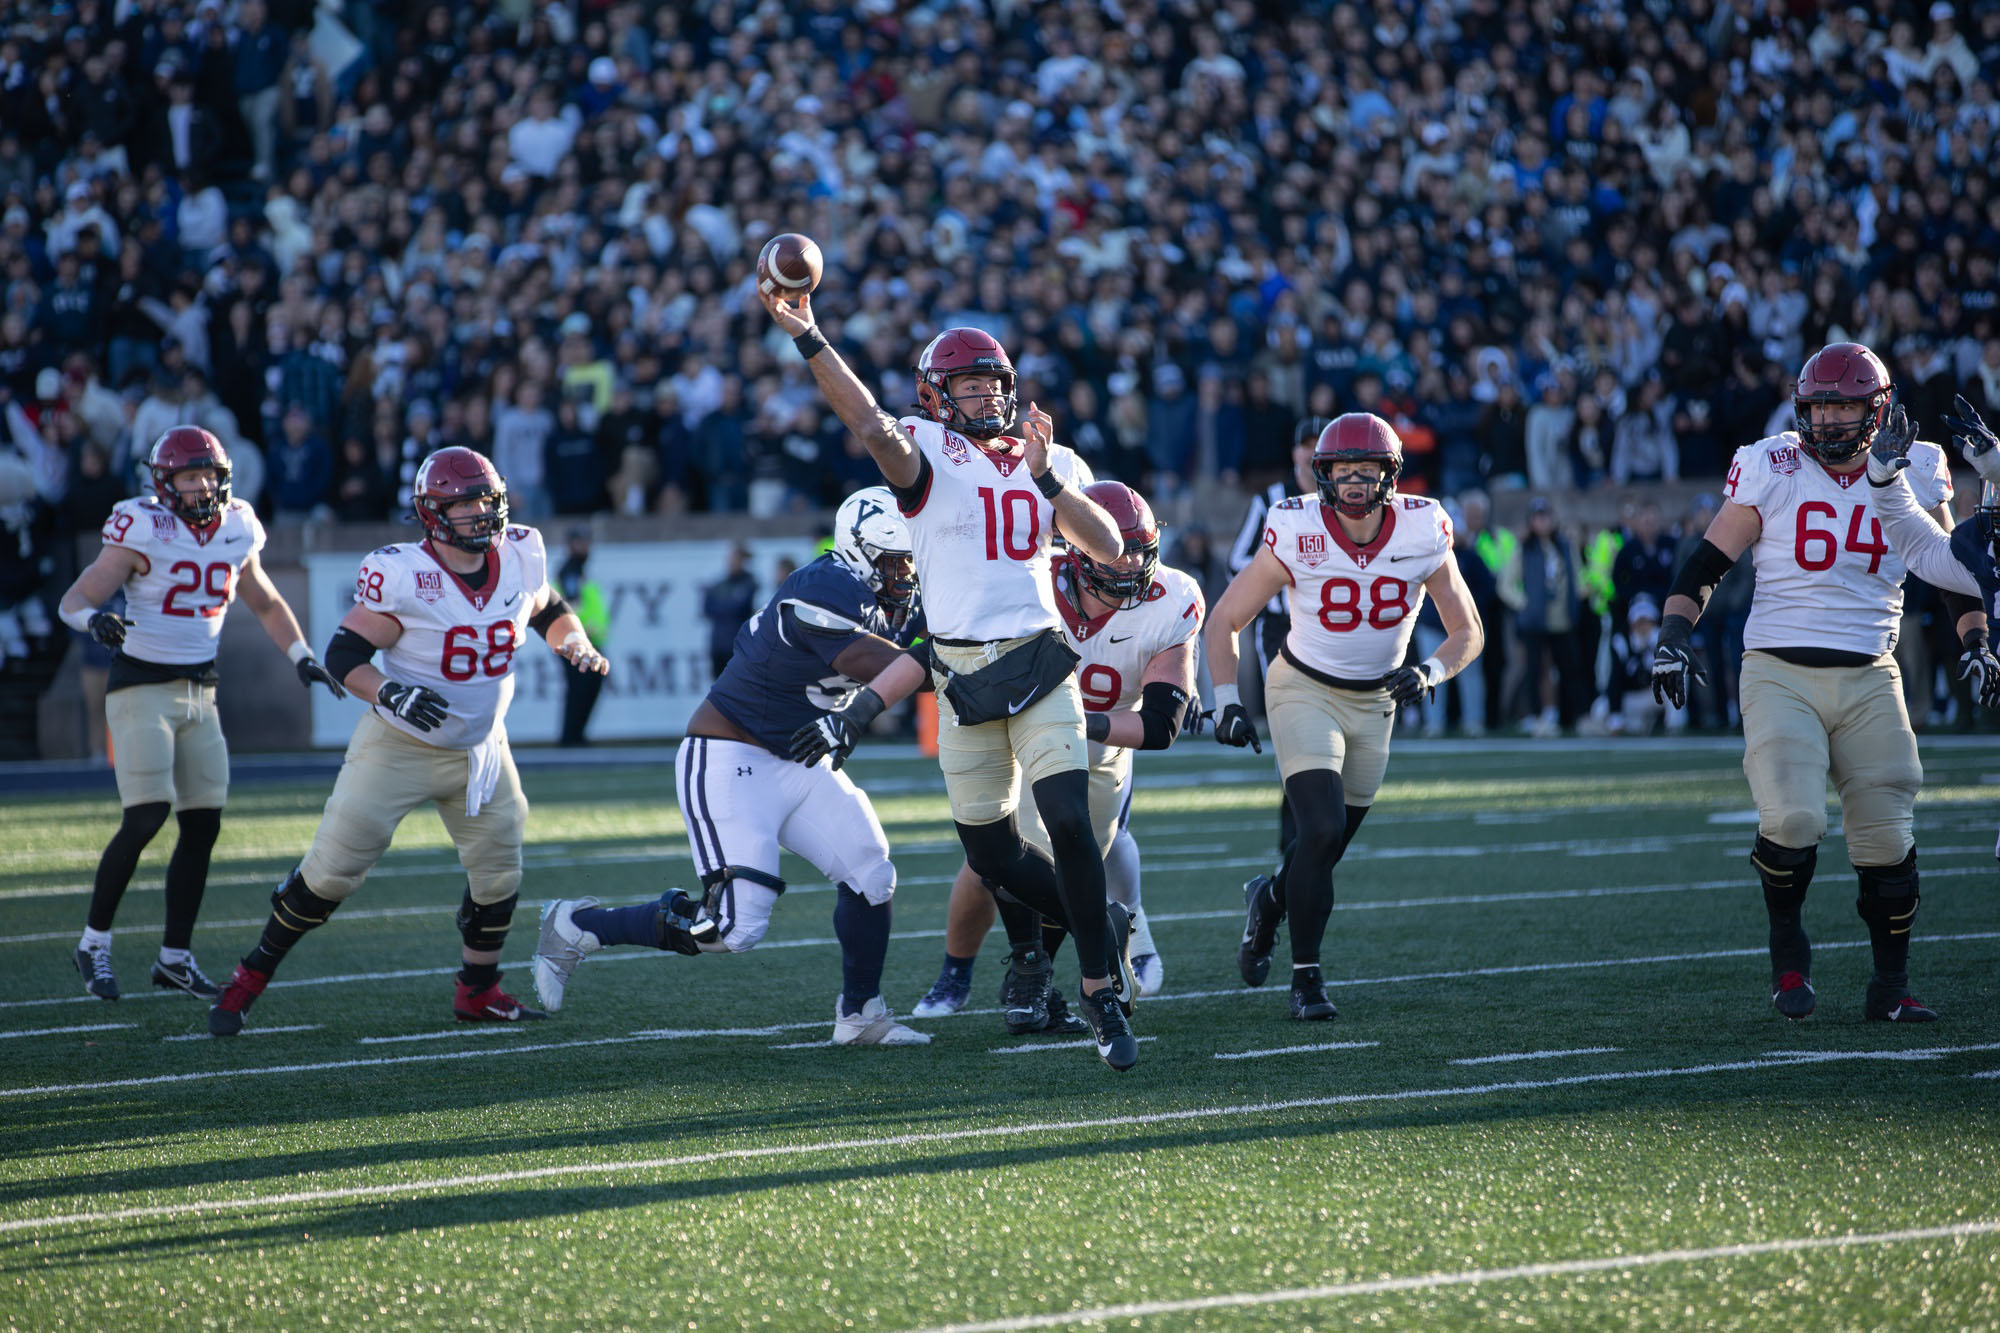 The annual showdown between the Harvard Crimson and the Yale Bulldogs returned to the Yale Bowl in New Haven, Connecticut on Nov. 18. A tight game, the Crimson fell to the Bulldogs 18-23, closing out the team’s 150th season.